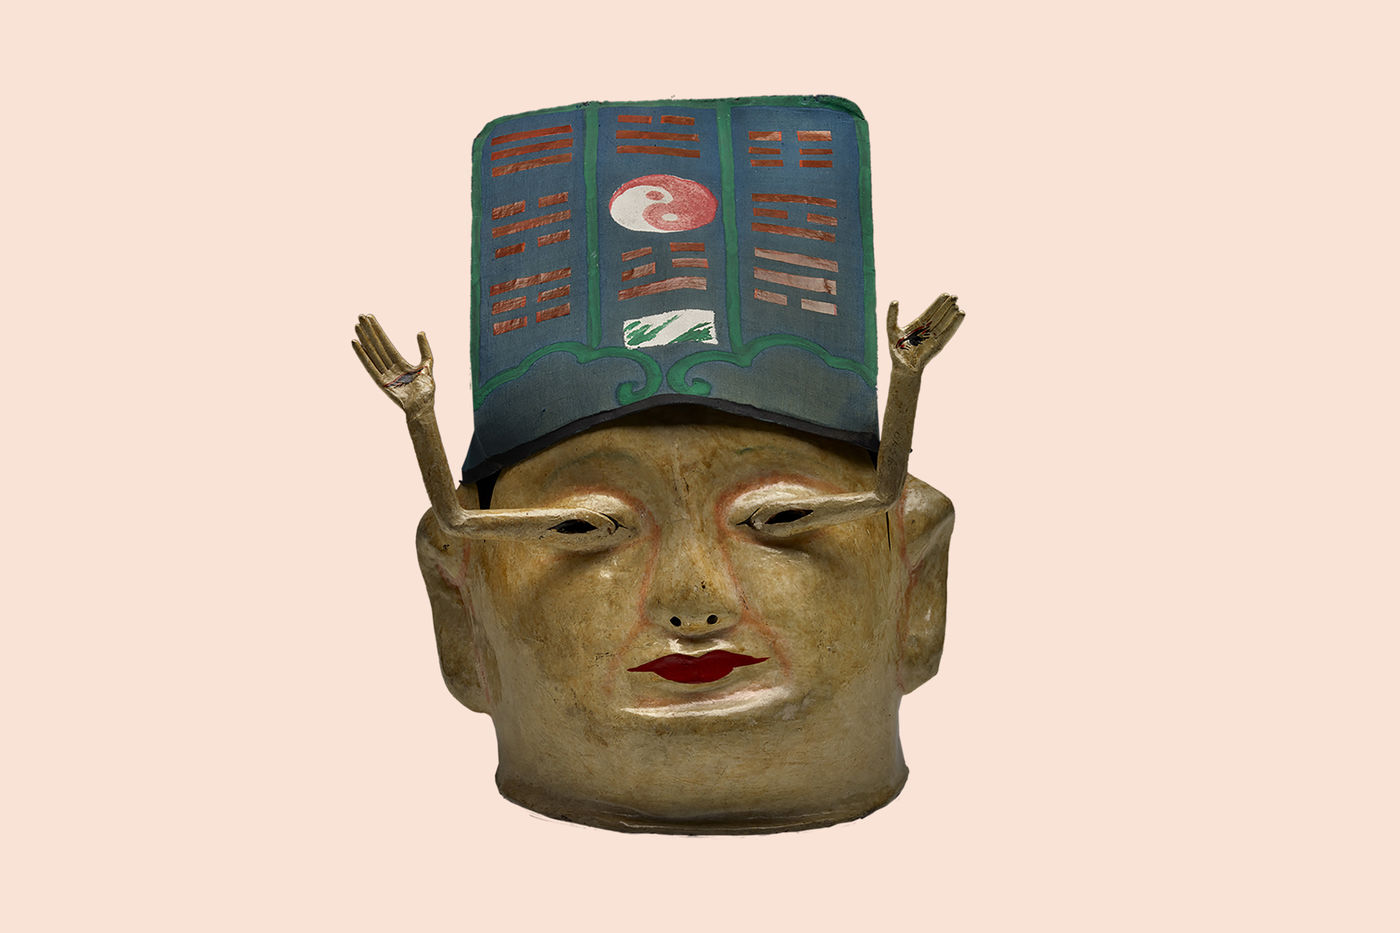 Worn during theatrical performances, this 19th-century mask depicts Yang Ren, who, after being blinded, used a spell to create new eyes—resulting in a pair of tiny arms growing from his eye sockets with all-seeing eyes in the palms of the tiny hands.